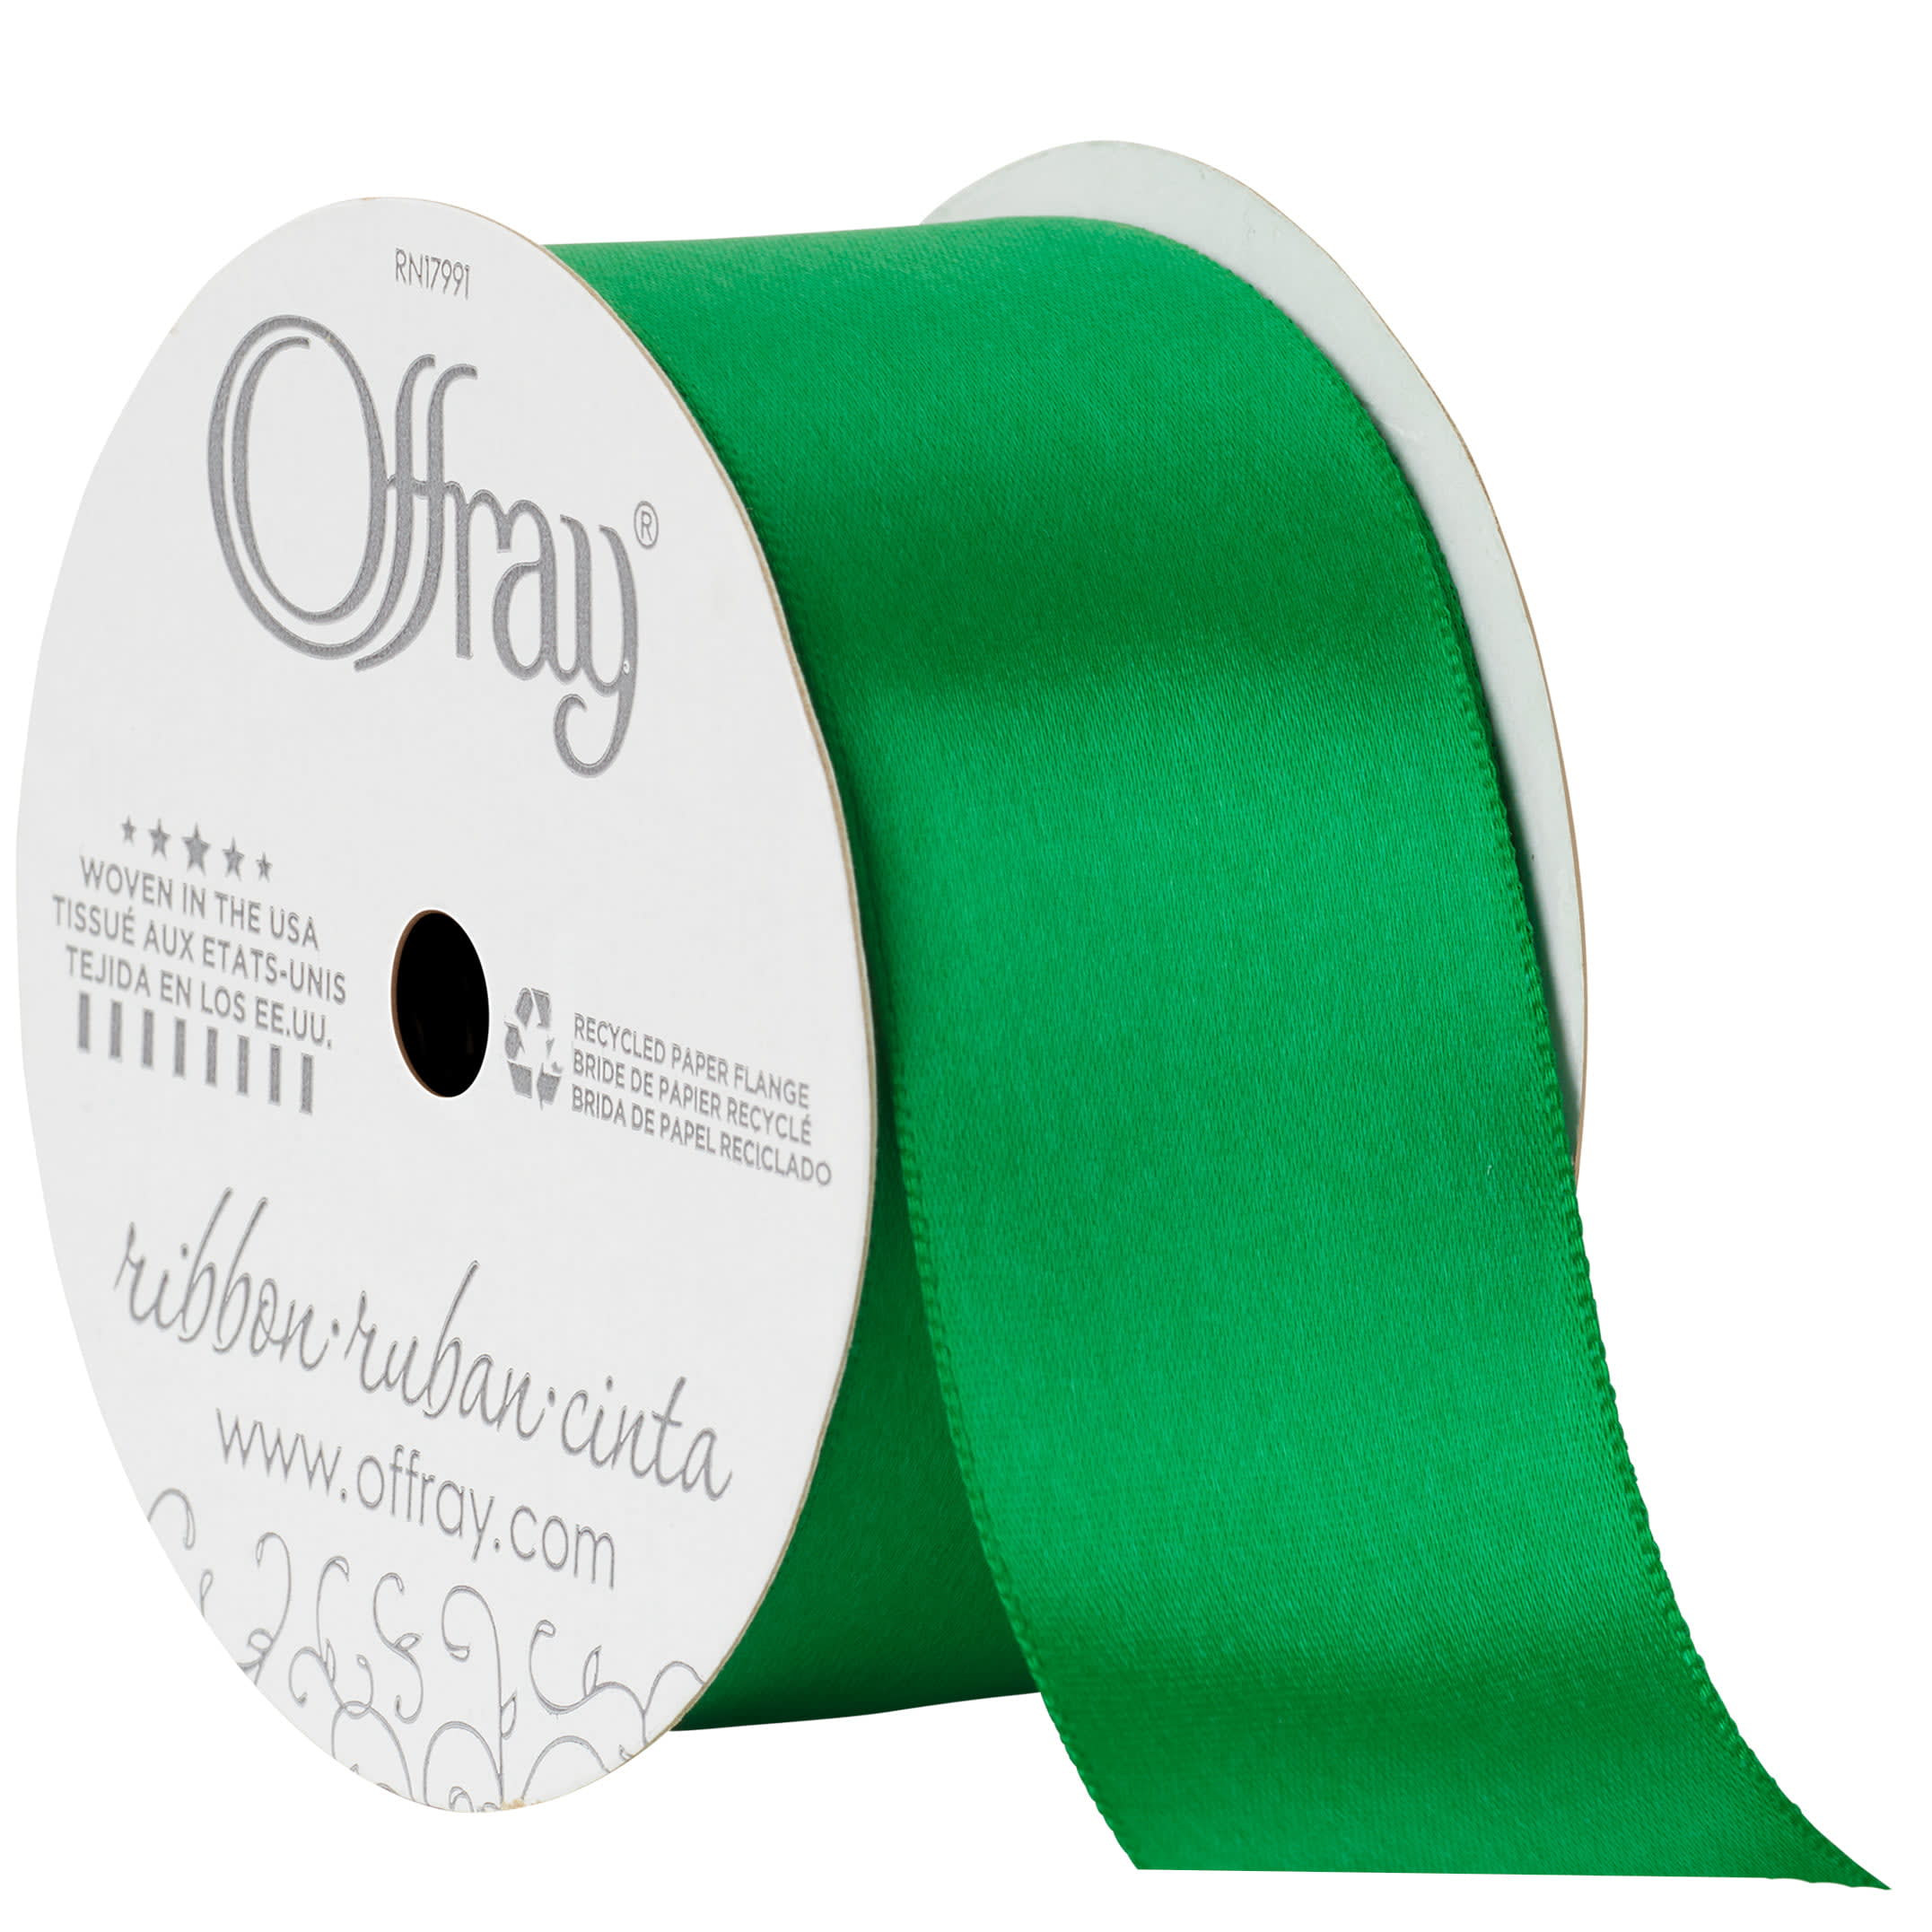 Offray Ribbon, Emerald Green 1 1/2 inch Single Face Satin Polyester Ribbon,  12 feet - DroneUp Delivery